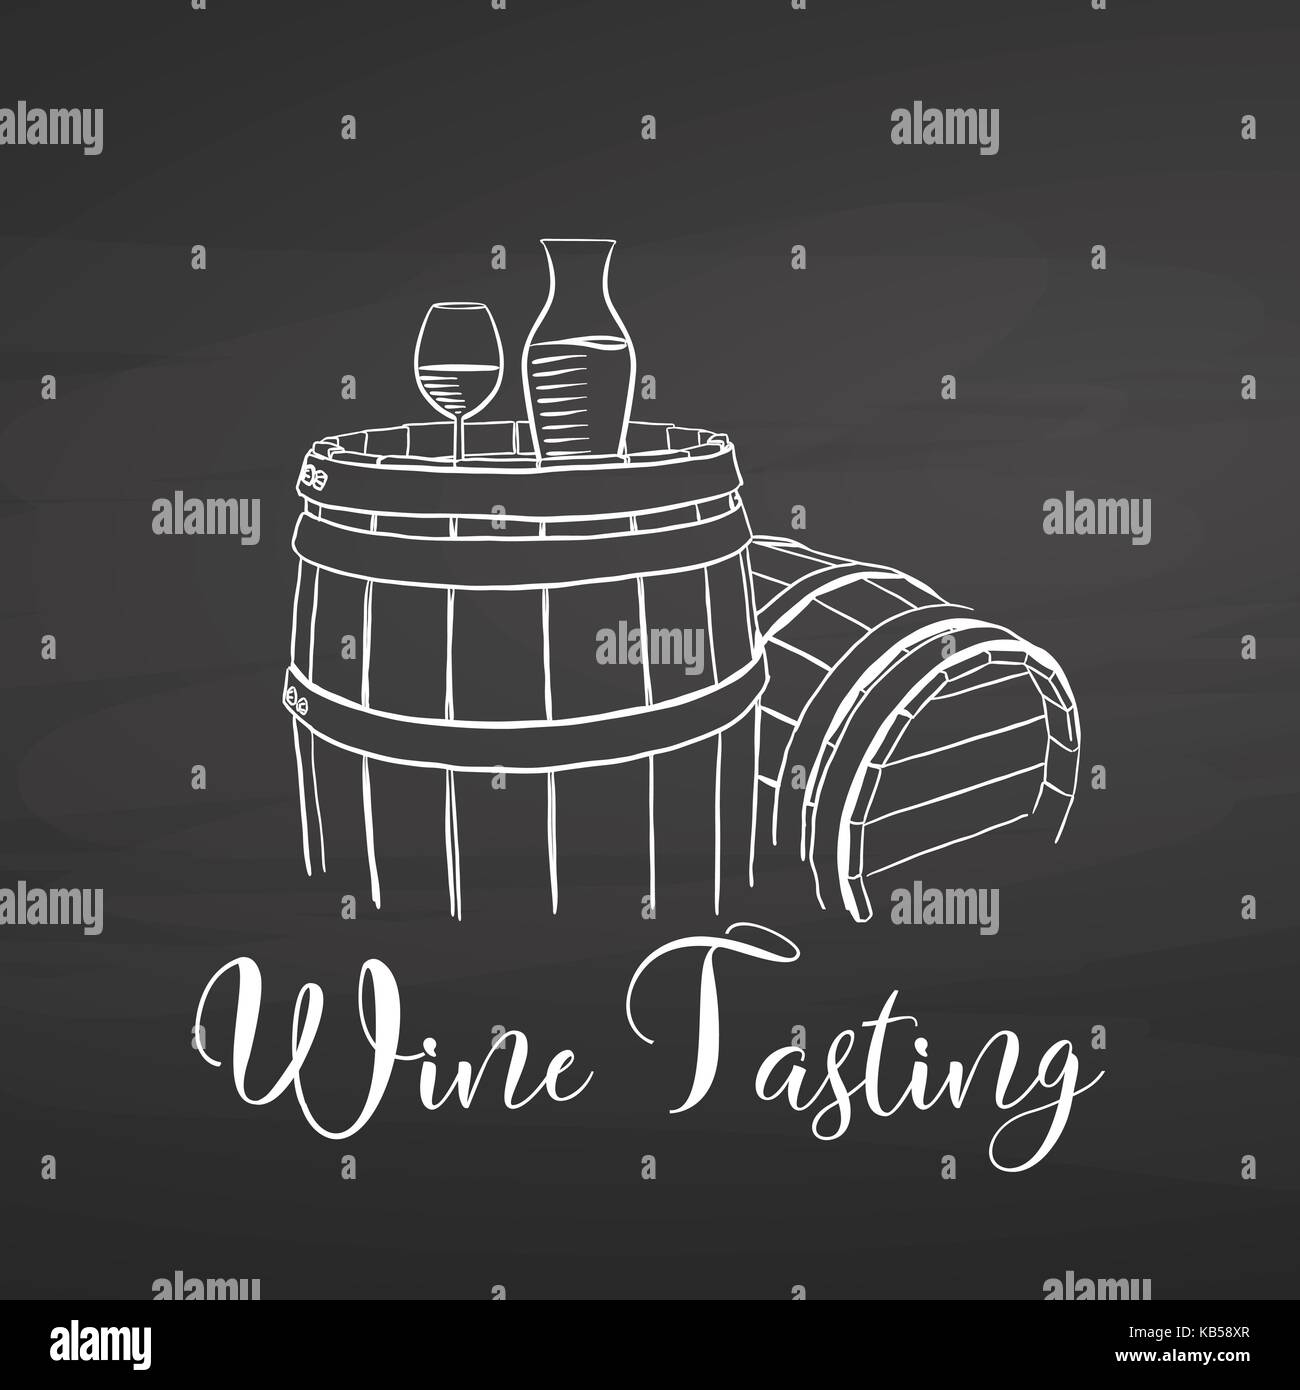 Wine Tasting symbol and lettering on chalkboard. Hand drawn healthy food sketch. Black and White Vector Drawing on Blackboard. Stock Vector